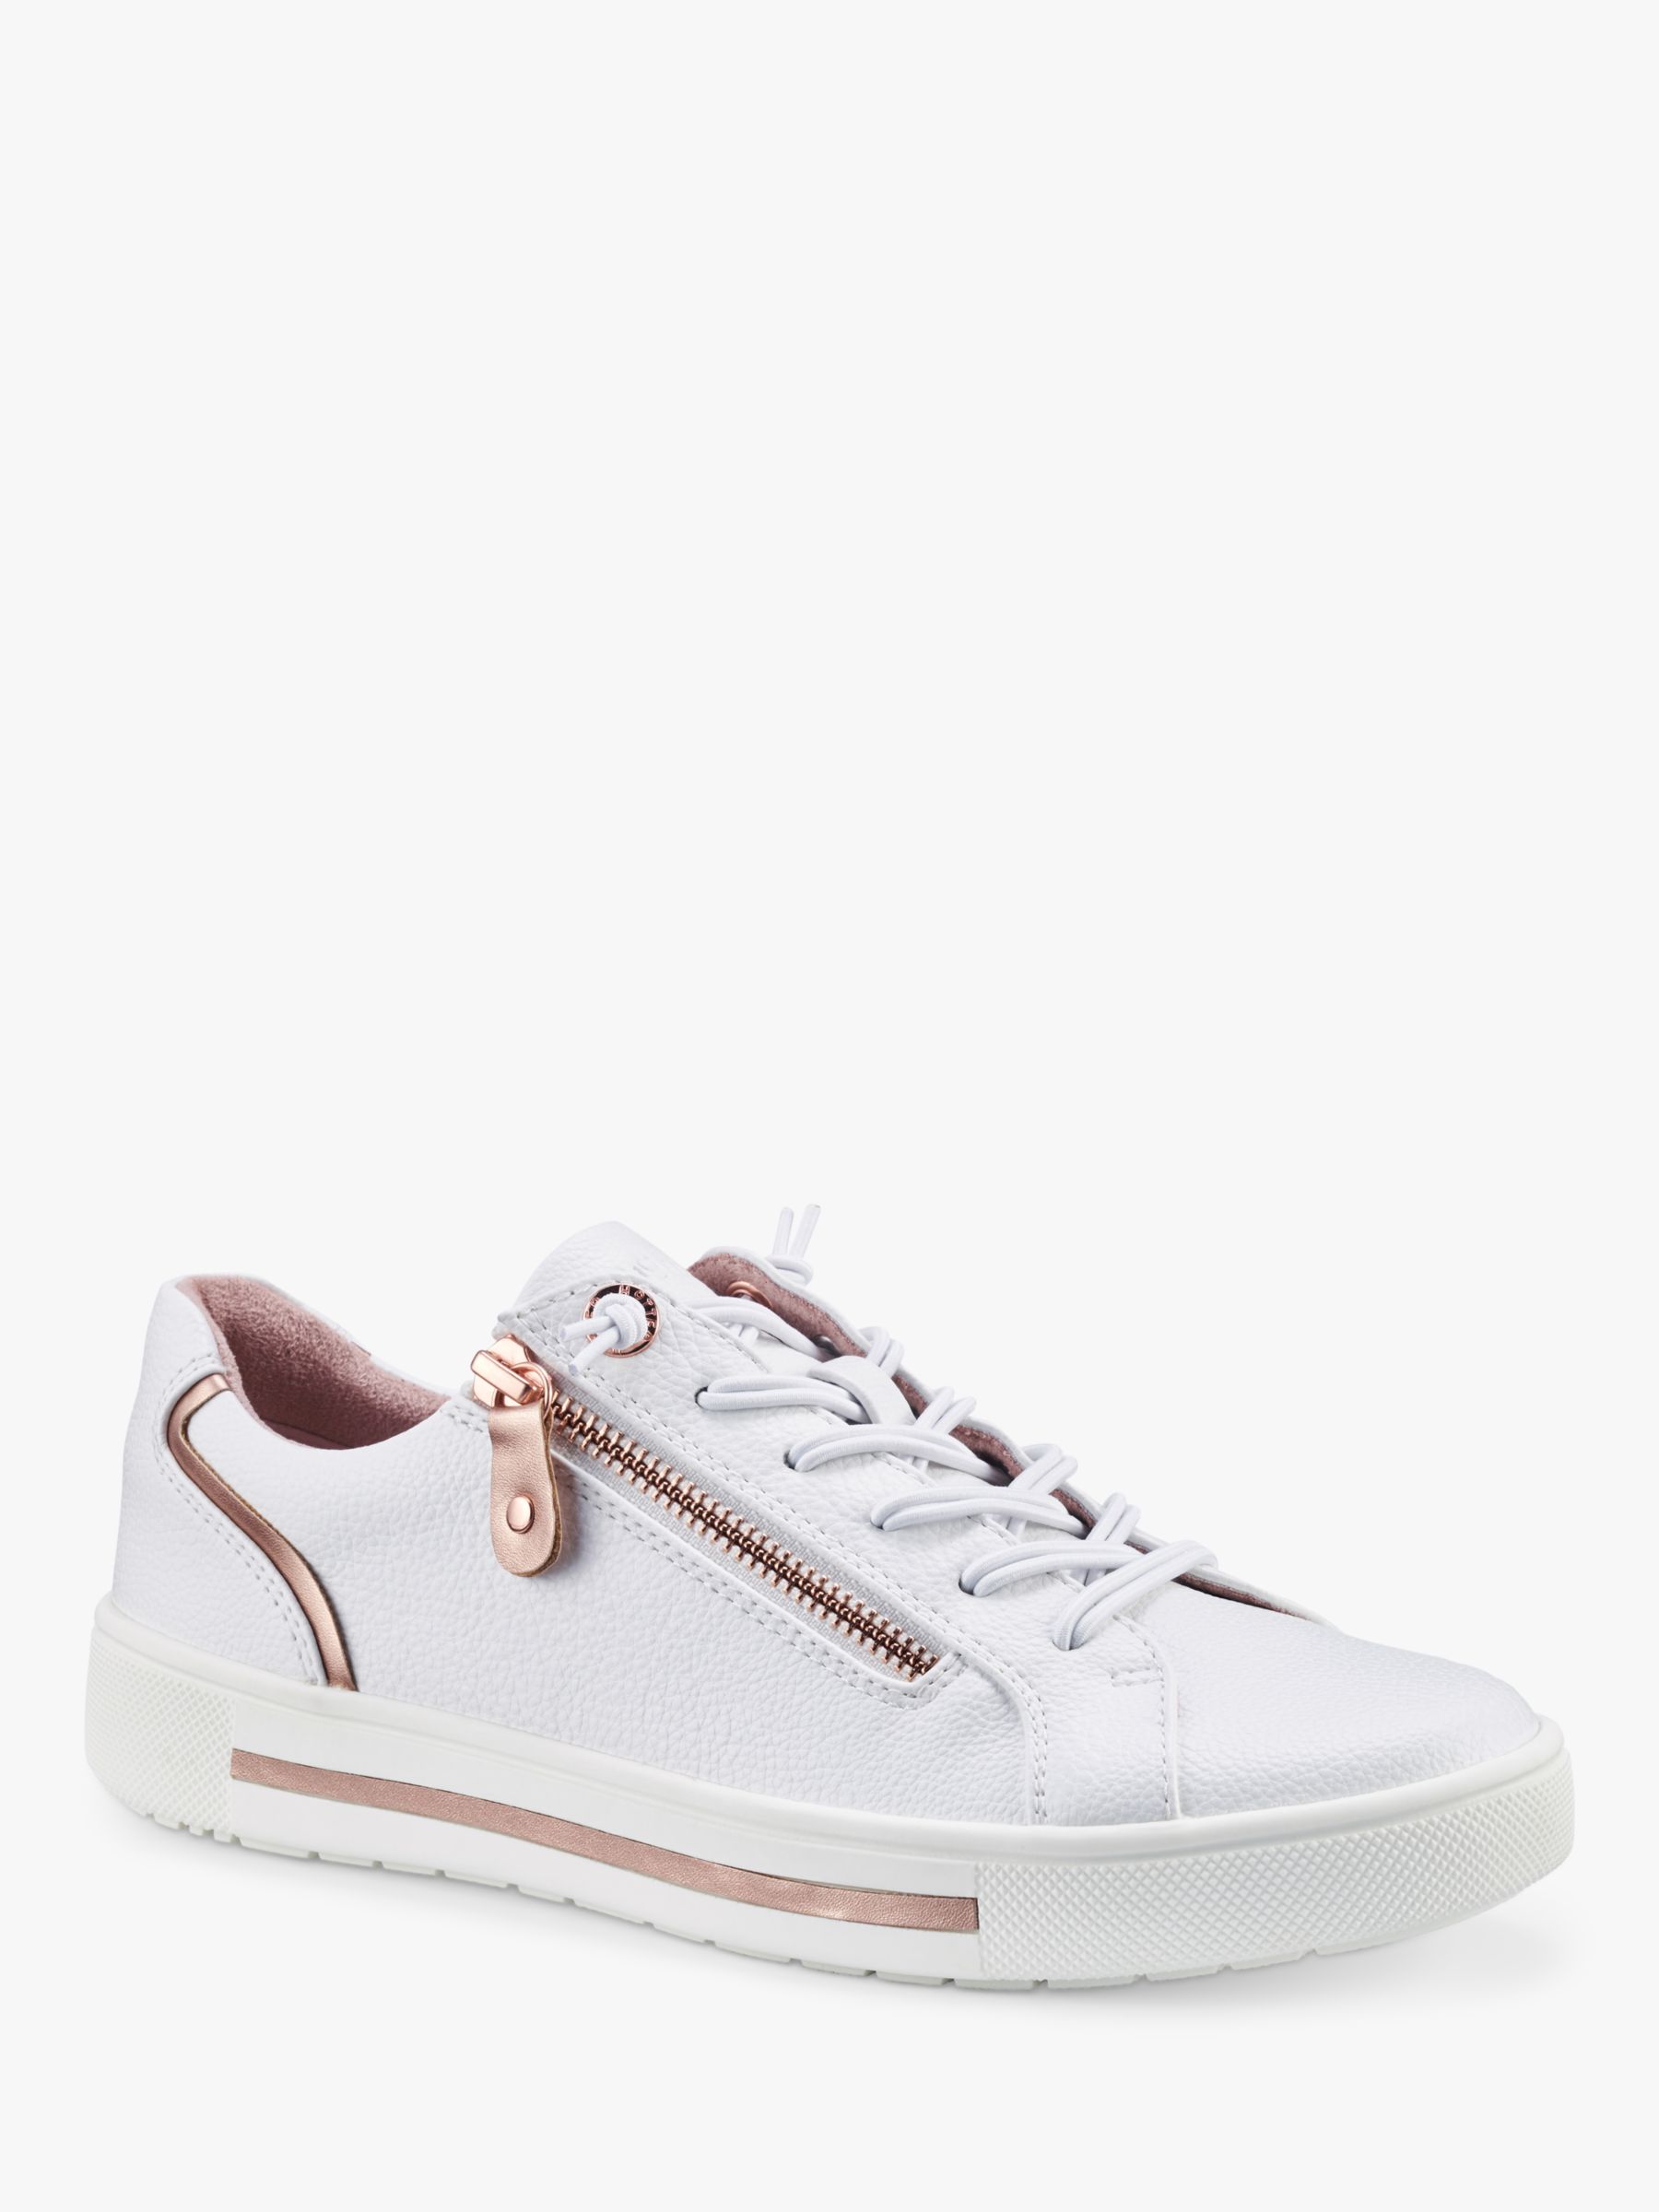 Buy Hotter Leo Wide Fit Zipped Trainers Online at johnlewis.com